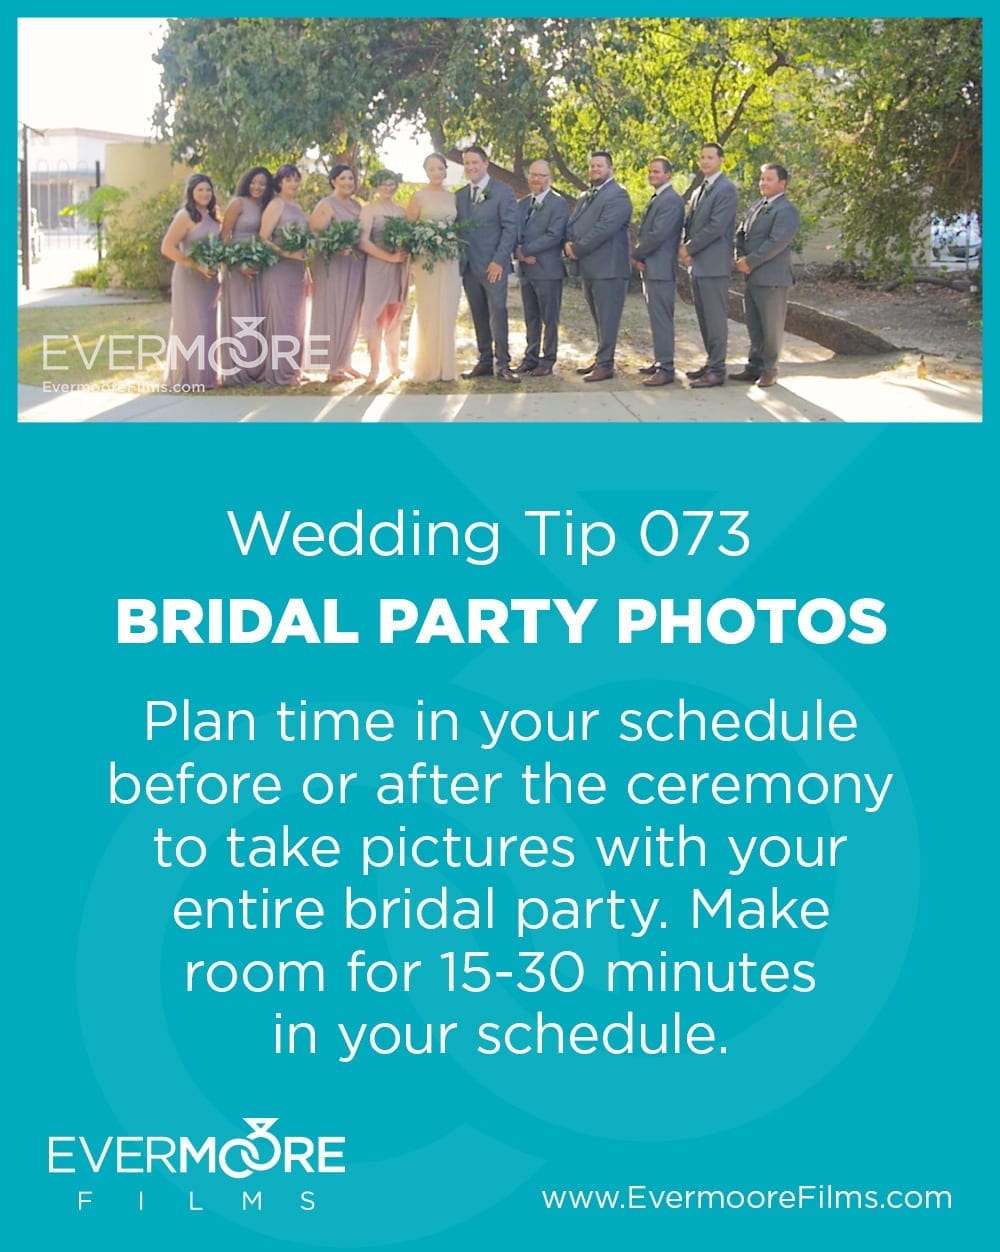 Bridal Party Photos | Wedding Day Tip 073 | Evermoore Films | Plan time in your schedule before or after the ceremony to take pictures with your entire bridal party. Make room for 15-30 minutes in your schedule. | www.EvermooreFilms.com 